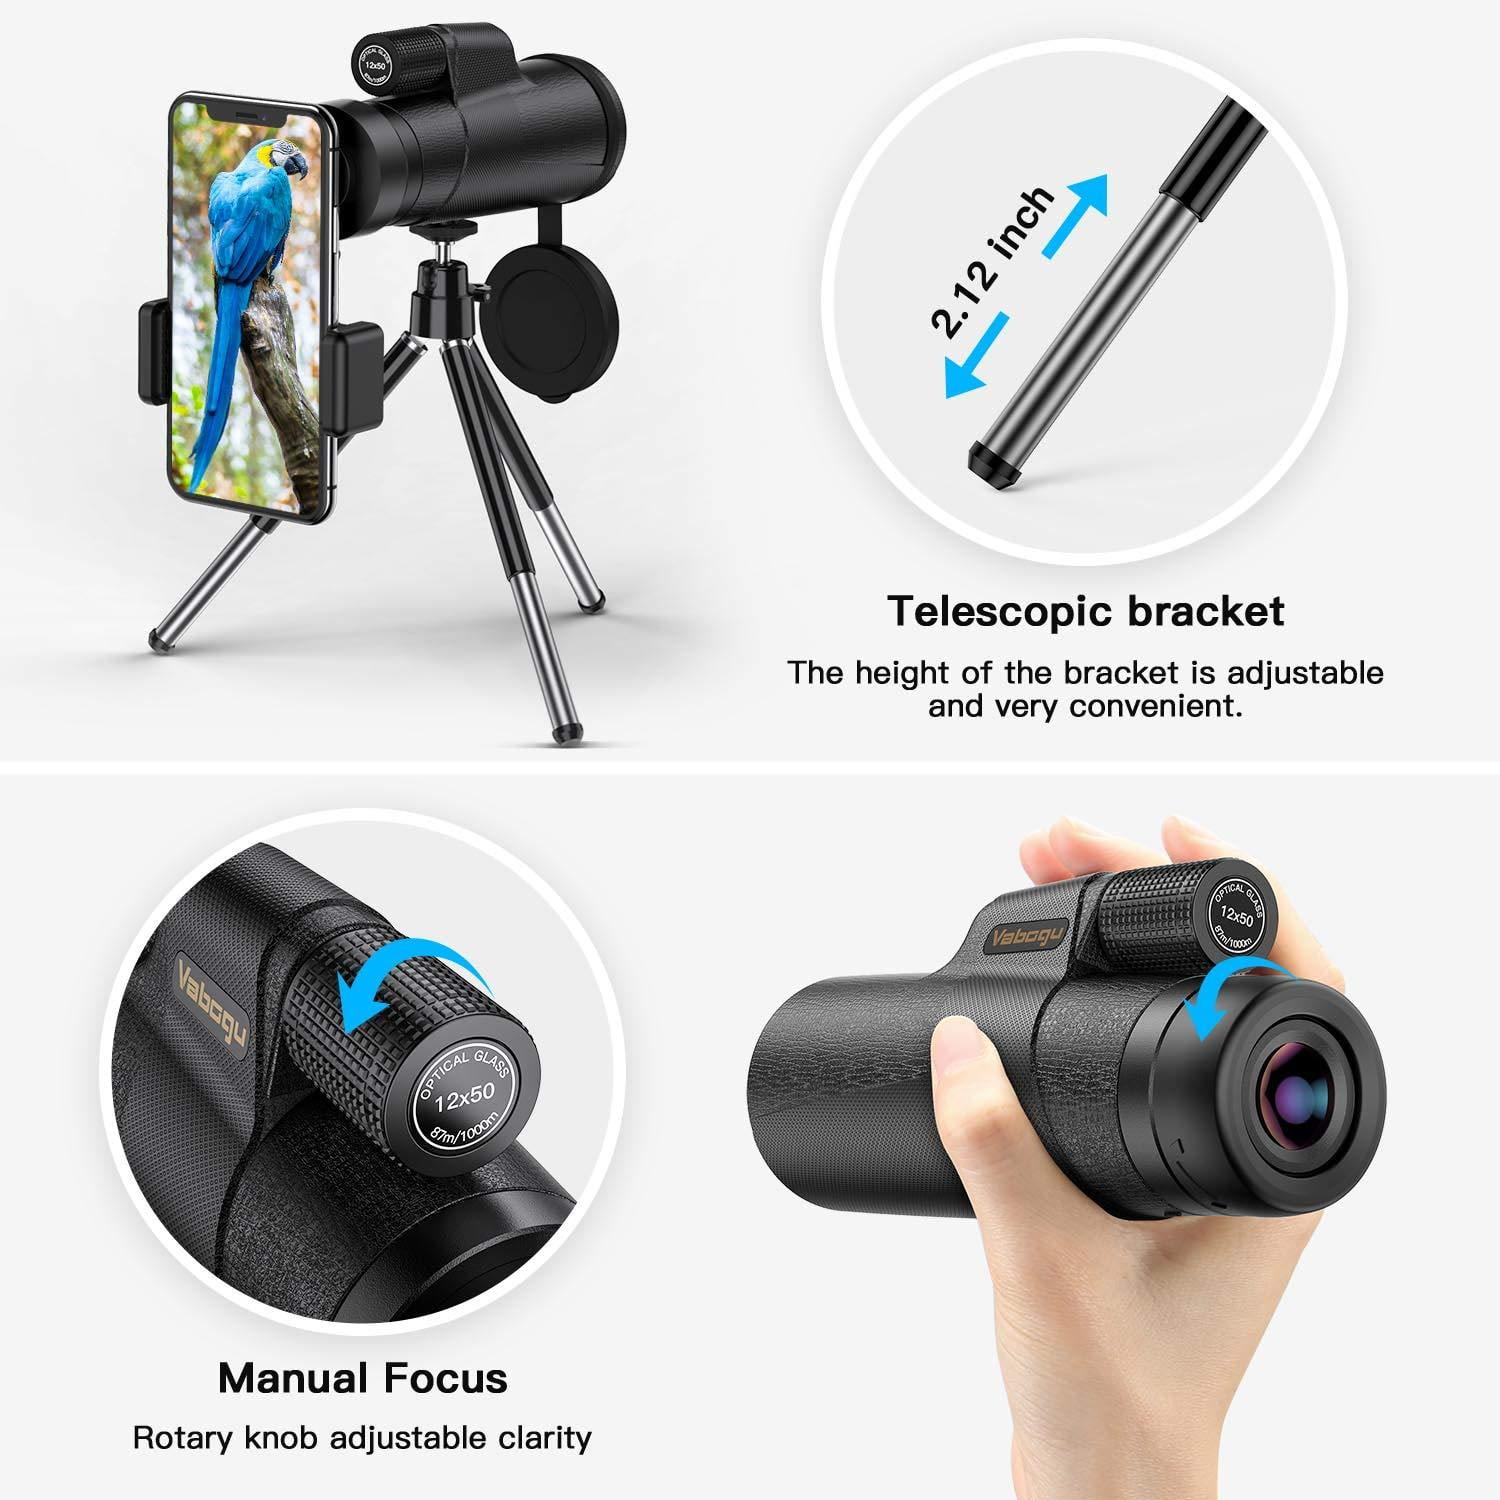 BAK4 Prism High Power Vision Handheld Waterproof Monoculars .Ideal for Travelling,Hunting,Bird Watching,Camping Monocular Telescope 12x50 HD with Quick Smartphone Holder Hiking,Sporting Events 